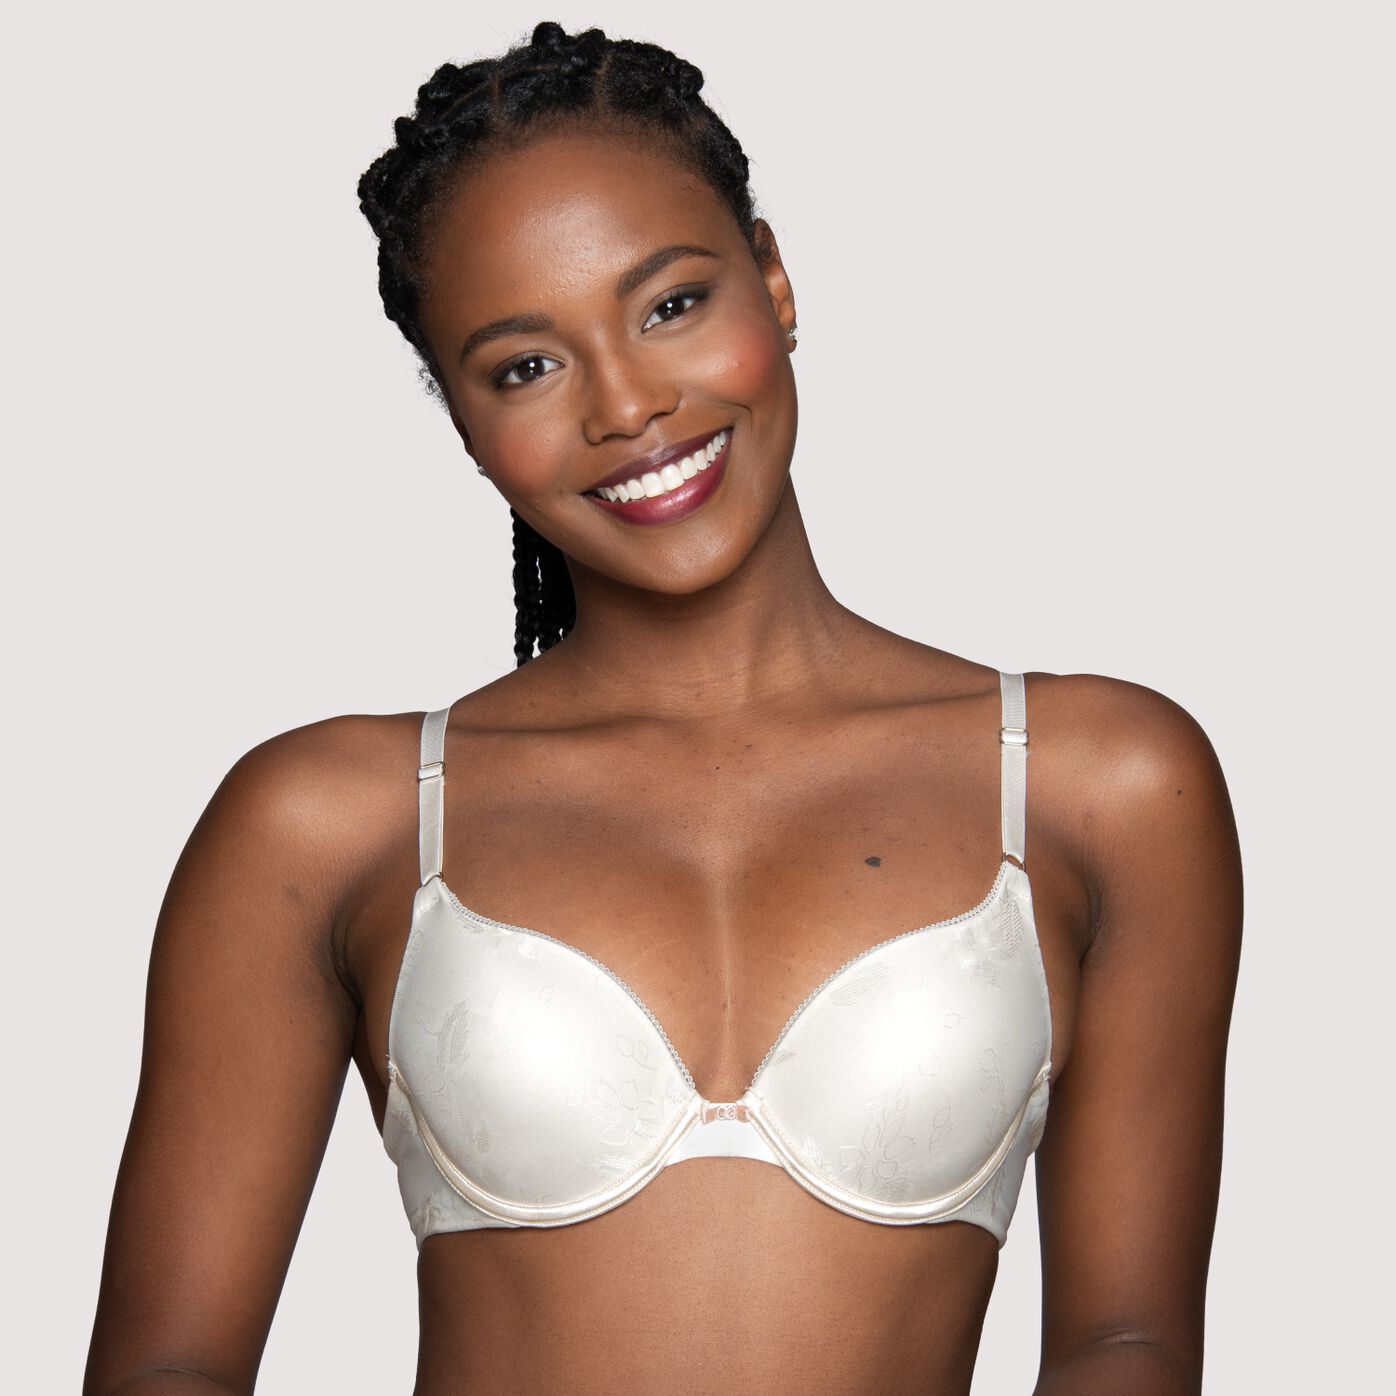 Barely There Women's We Have Your Back Underwire Bra, White, 36A